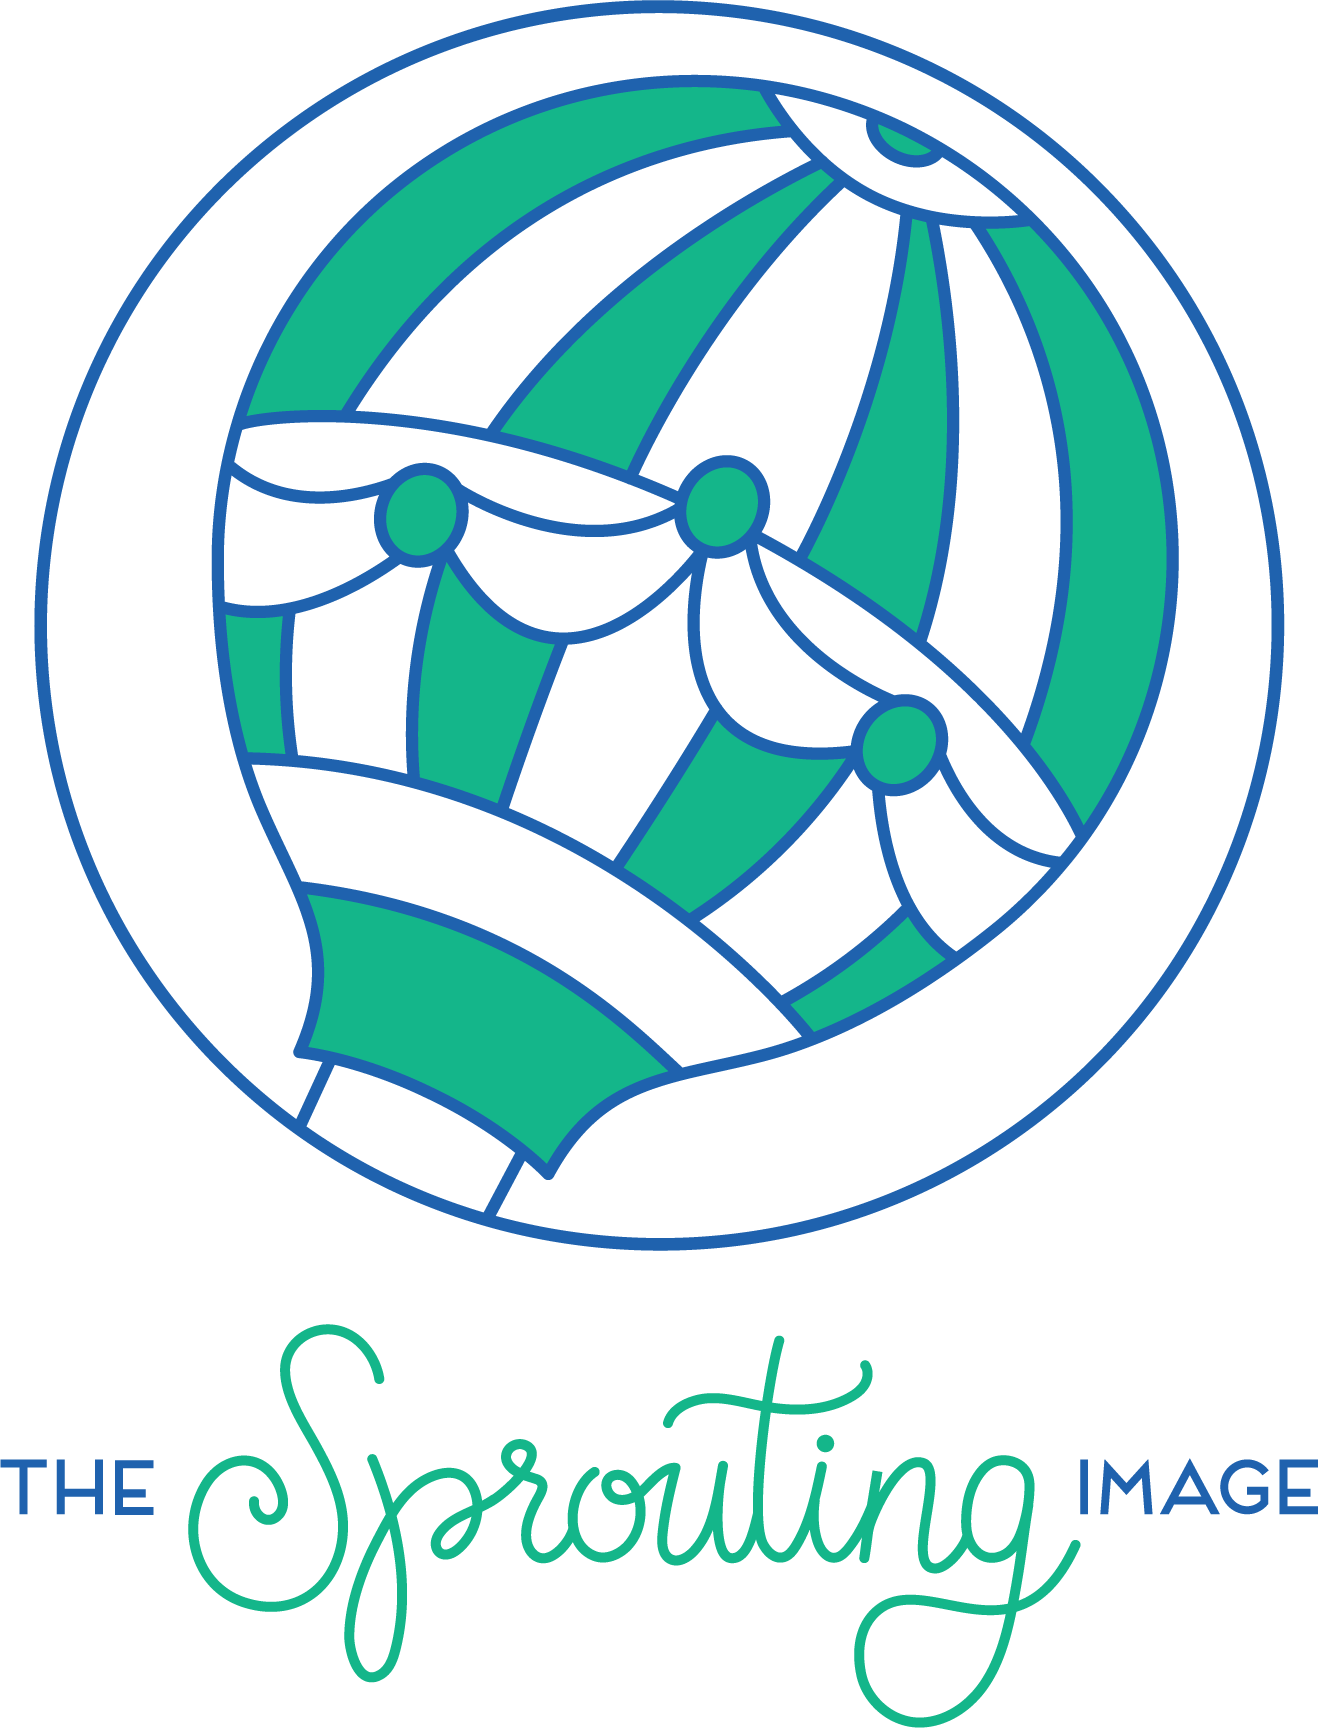 The Sprouting Image